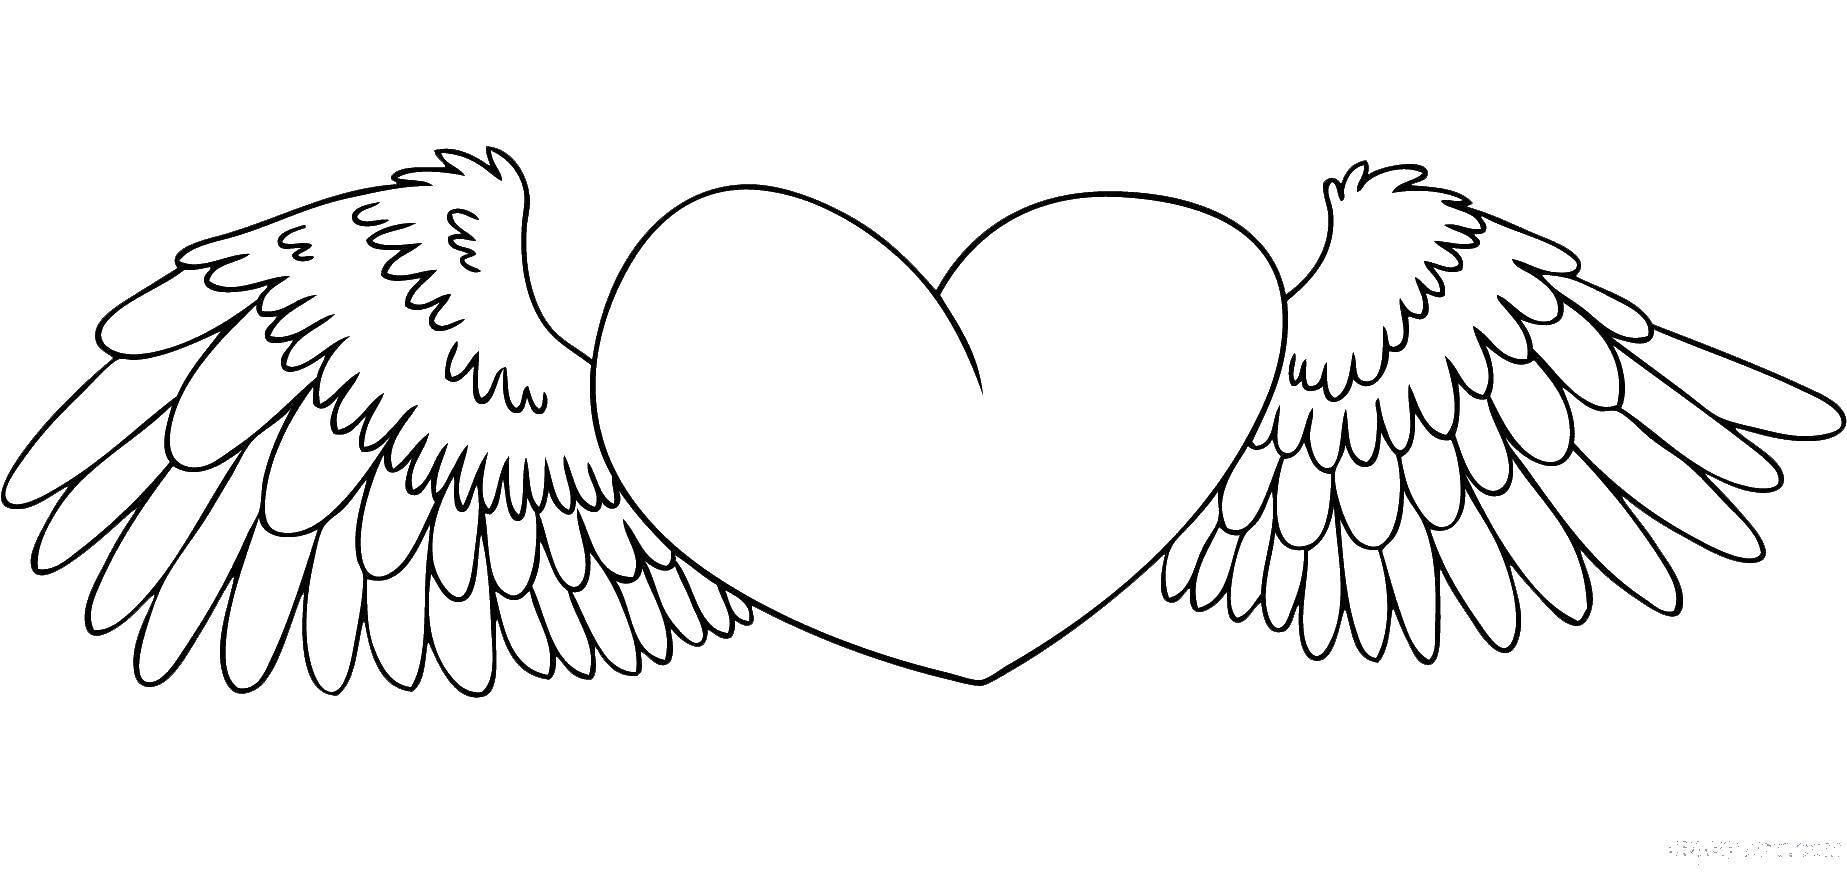 Coloring The winged heart.. Category coloring. Tags:  hearts, love, wings.